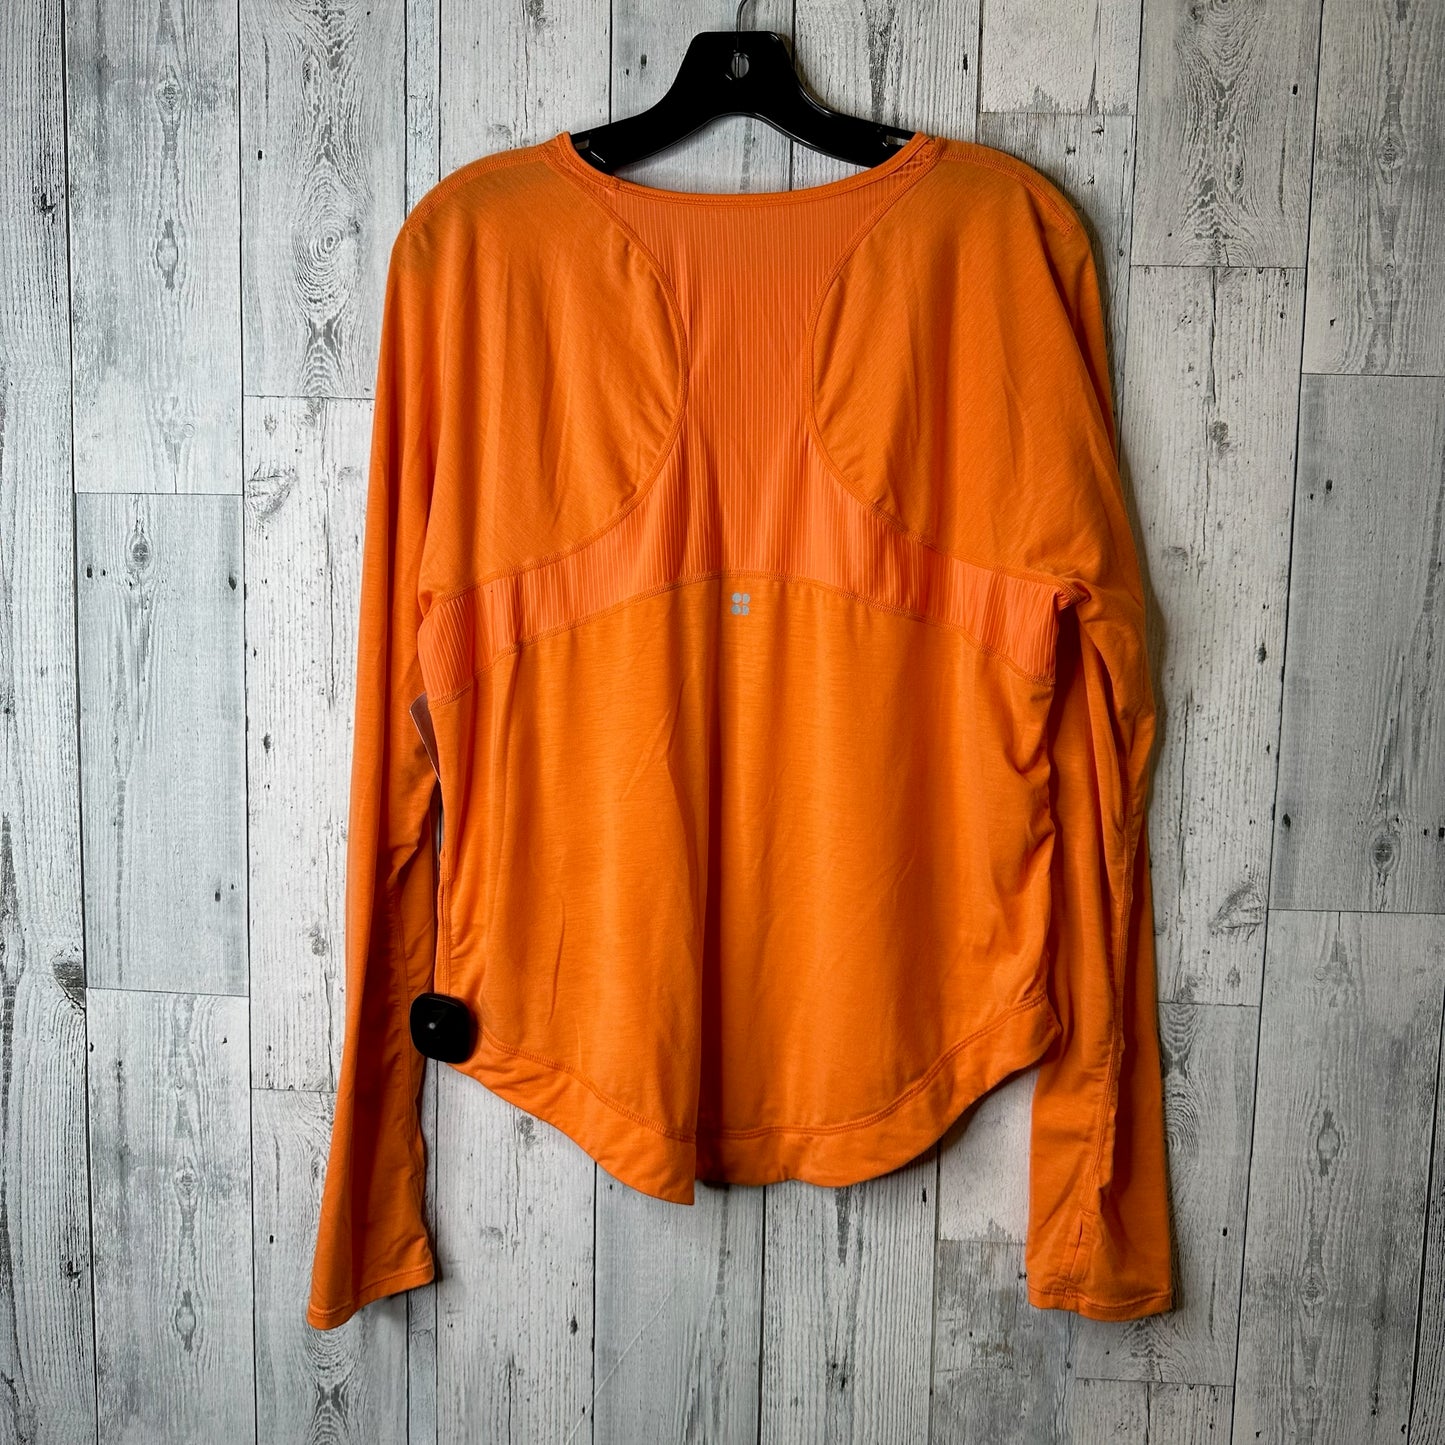 Athletic Top Long Sleeve Collar By Sweaty Betty  Size: M